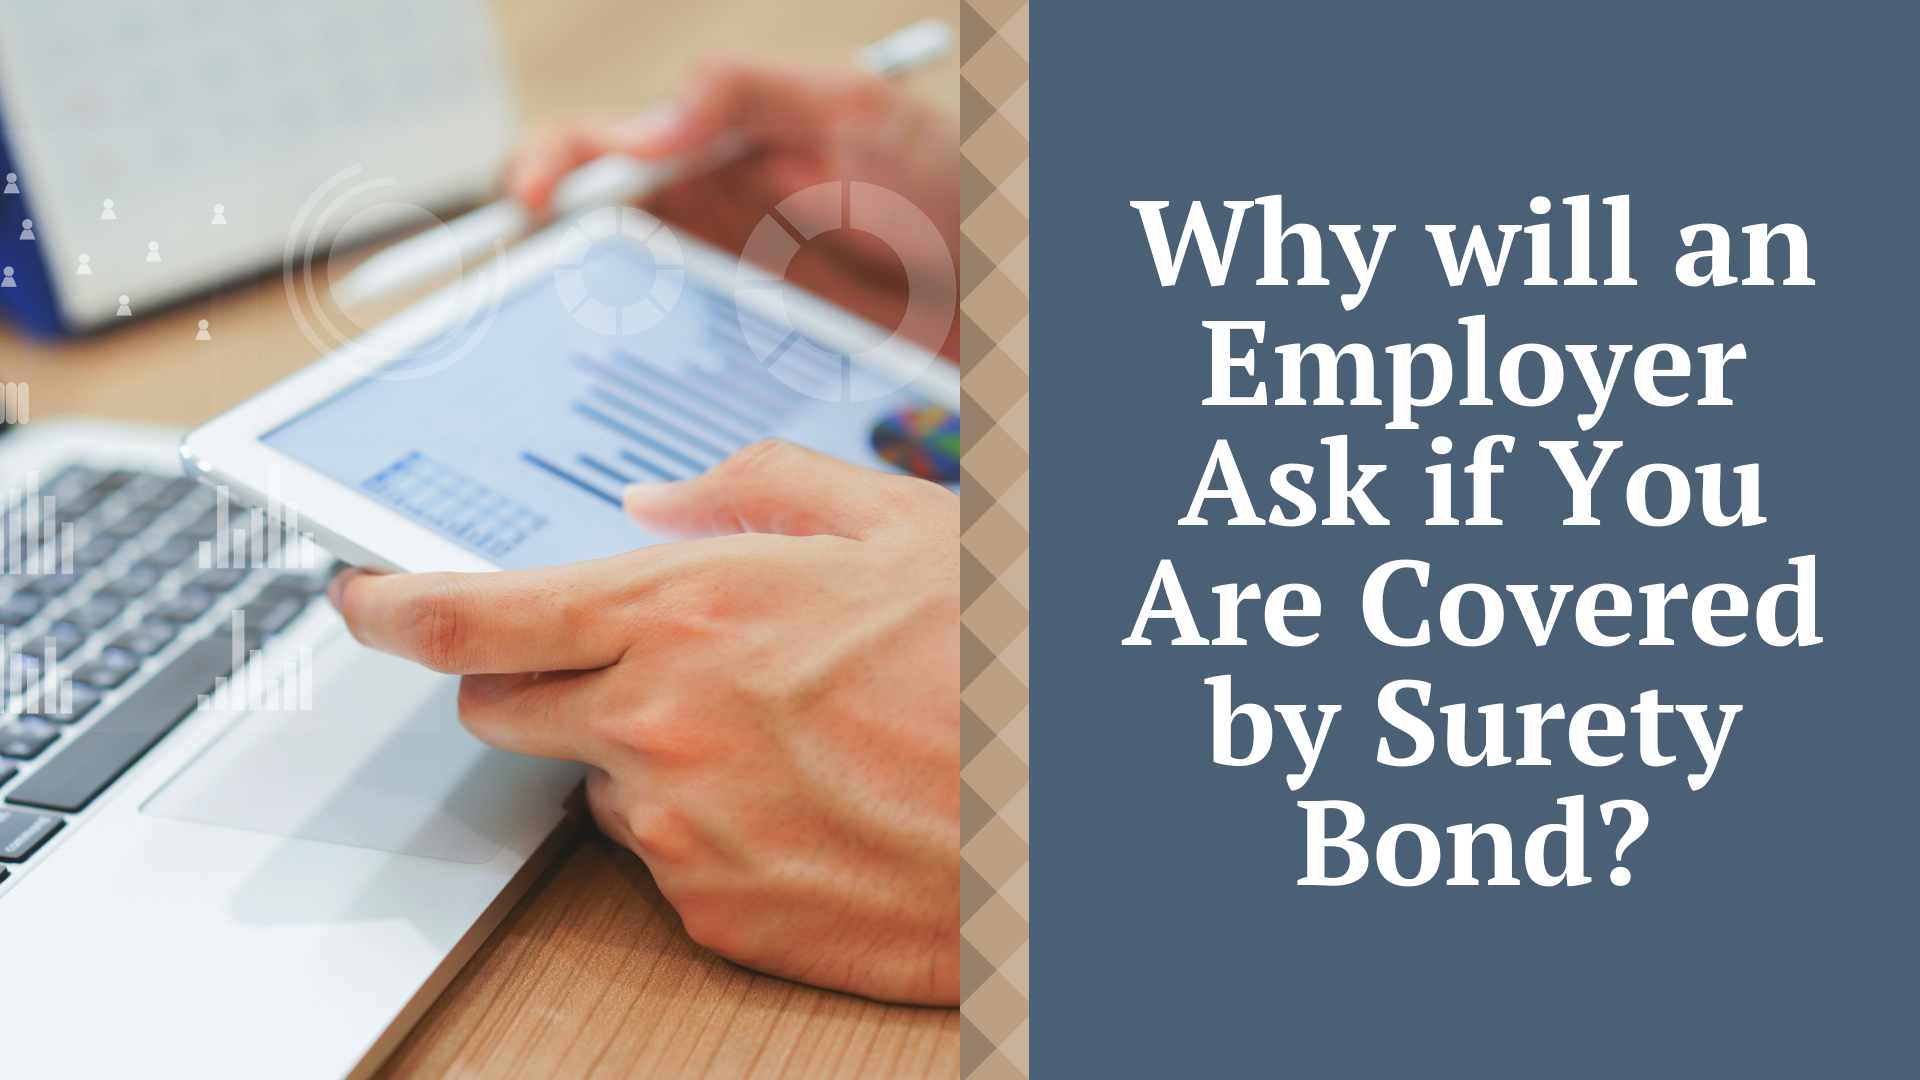 surety bond - Why will an Employer Ask if You Are Covered by Surety Bond - working